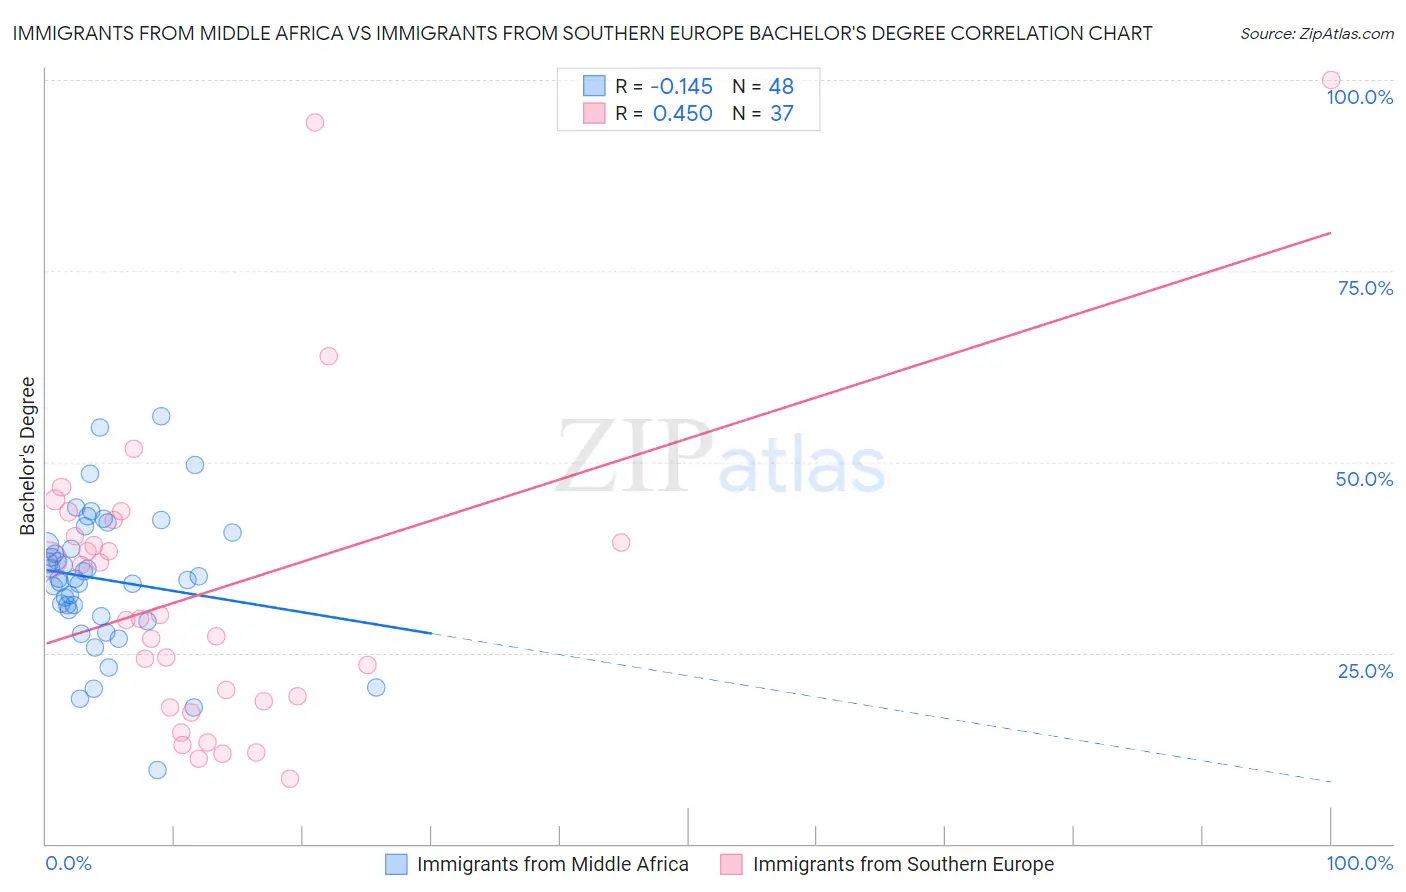 Immigrants from Middle Africa vs Immigrants from Southern Europe Bachelor's Degree